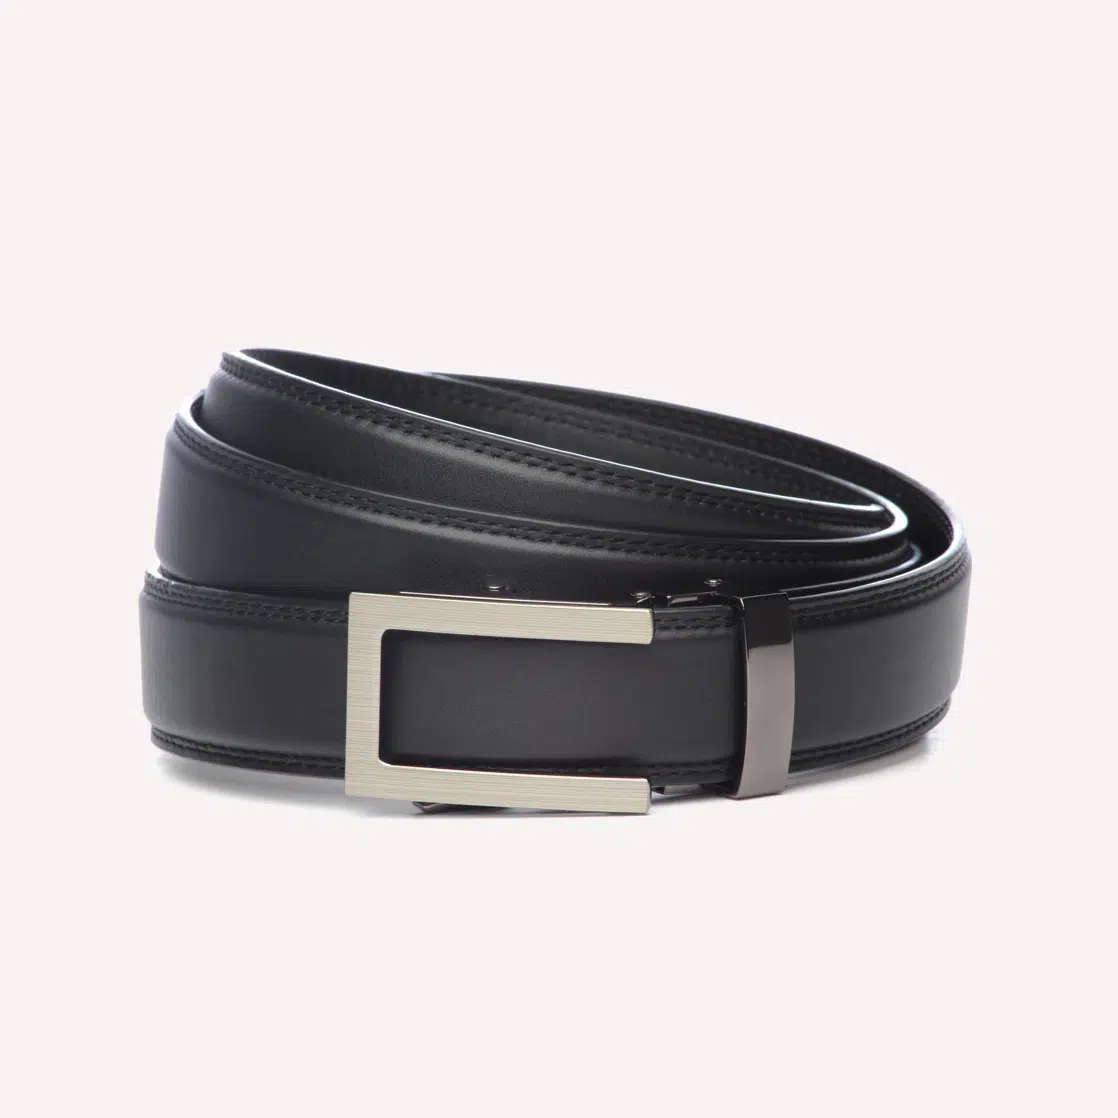 Anson Belt Black Leather With Buckle